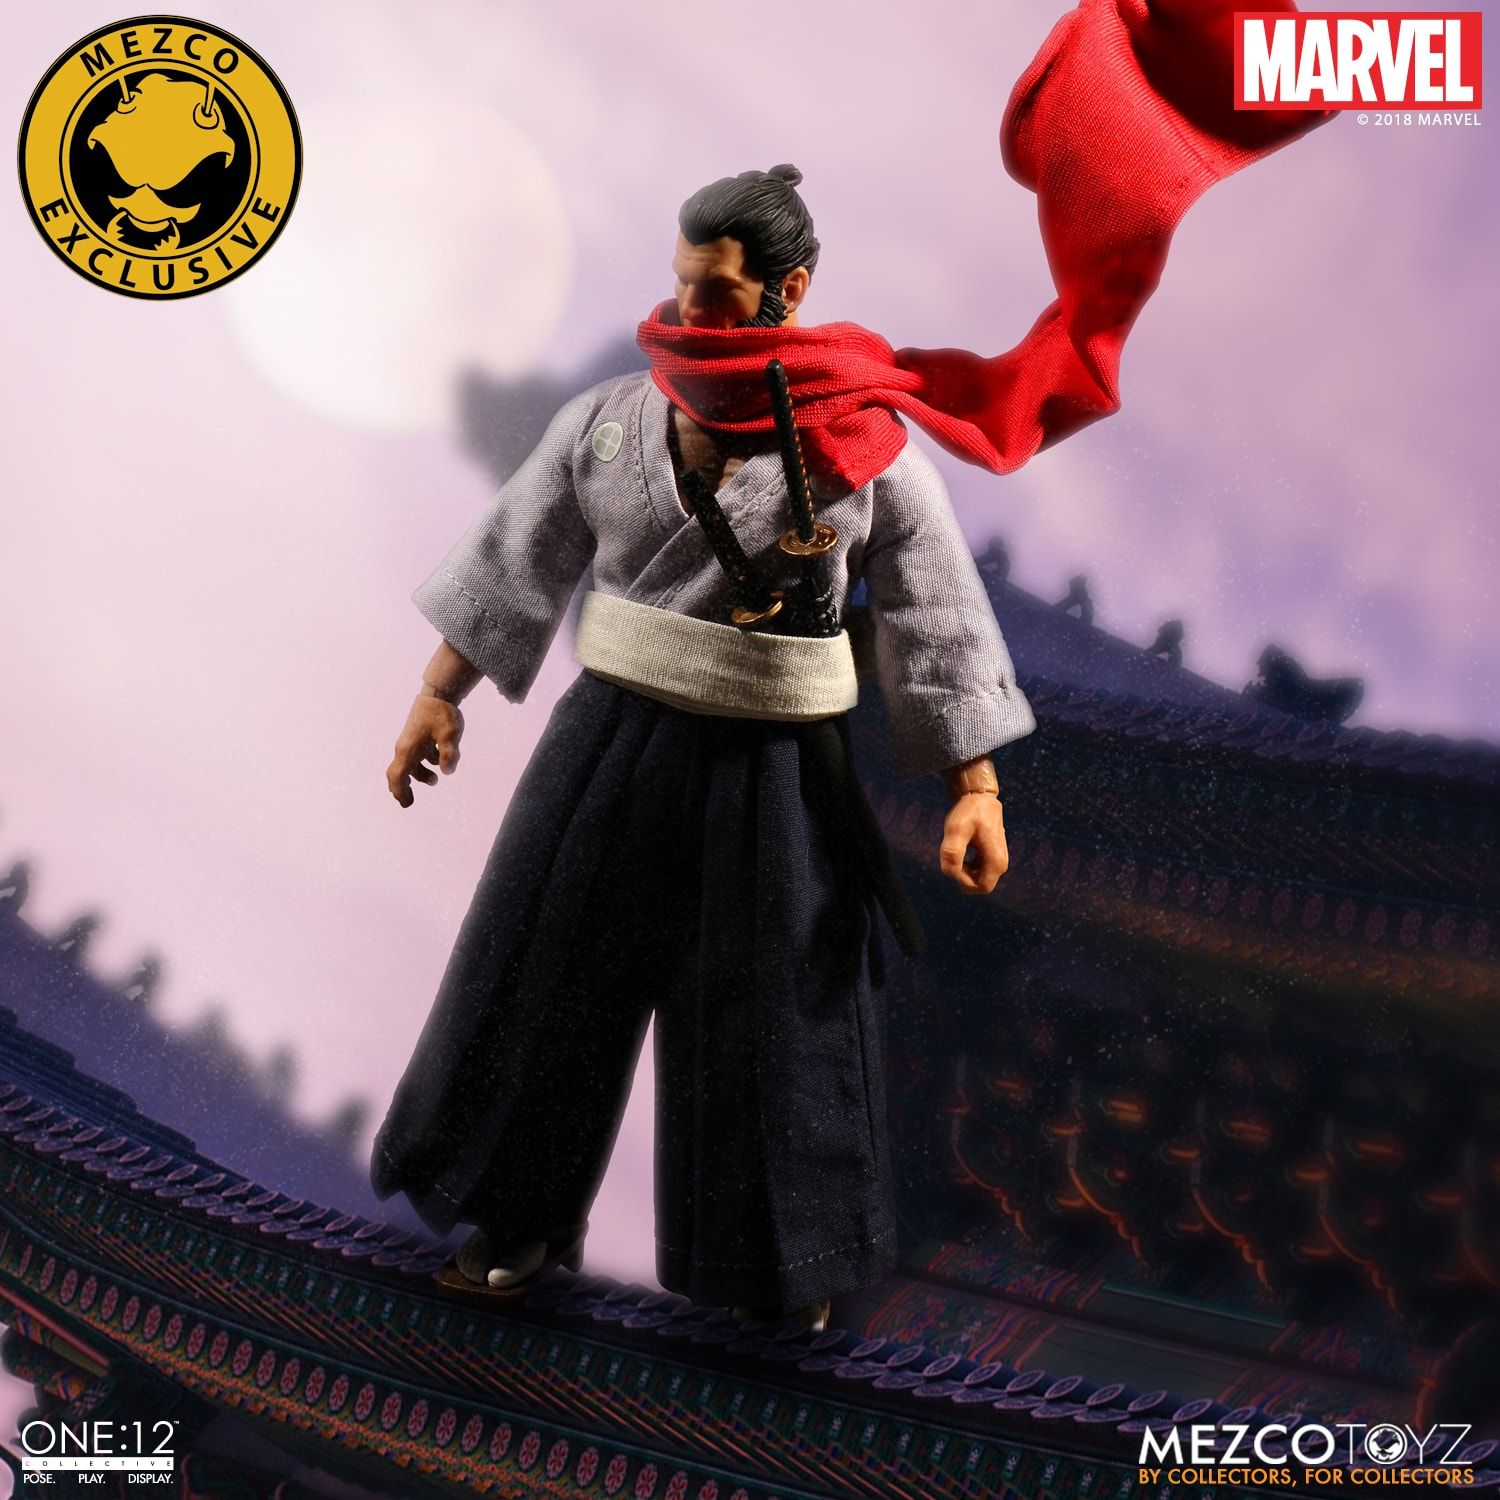 Mezco NYCC Exclusive Marvel One:12 Collective Wolverine 5 Ronin ...